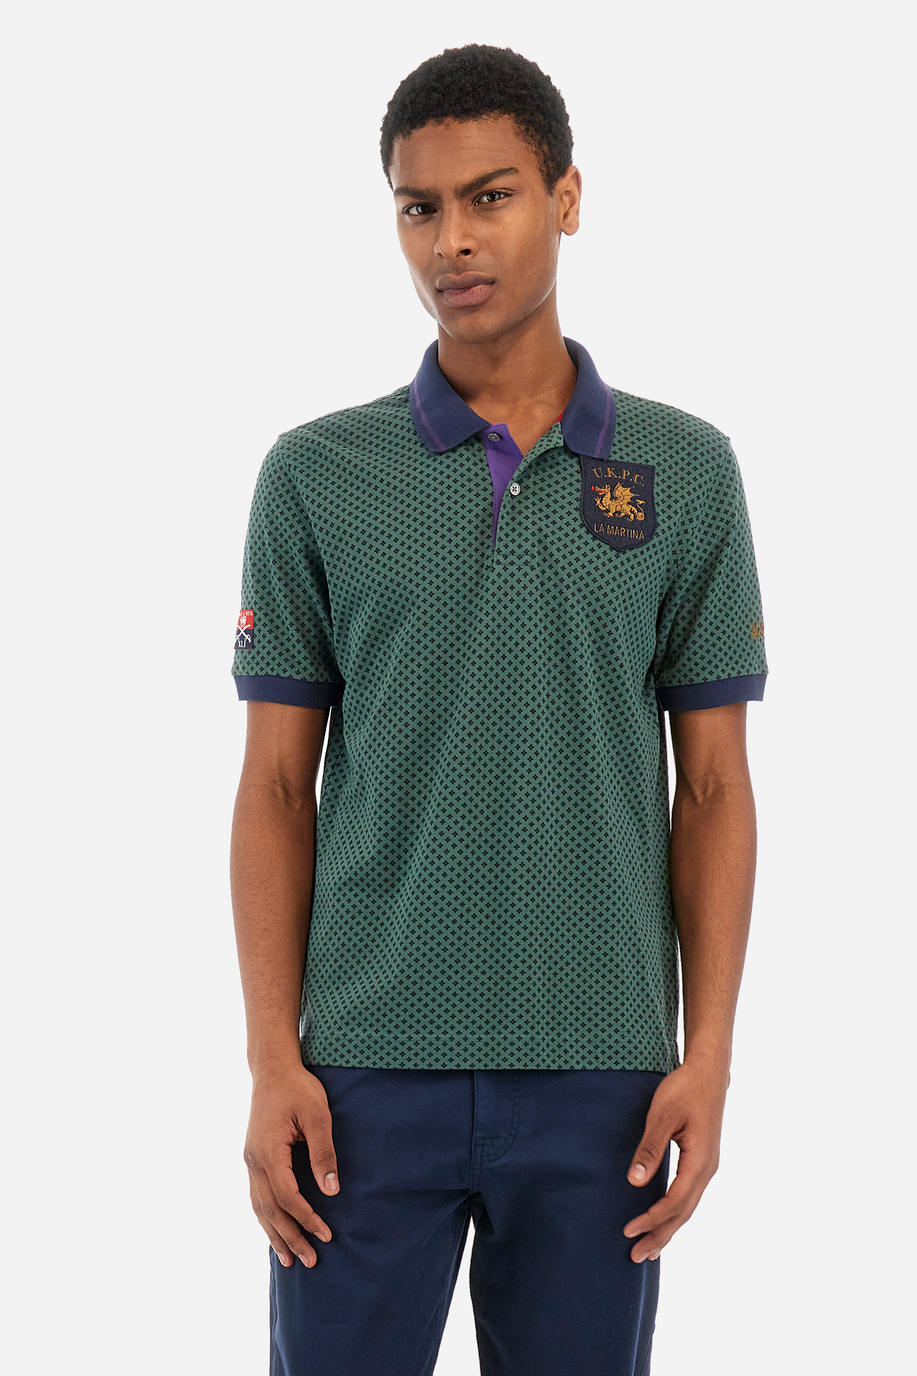 Man polo shirt in regular fit - Westleigh - Polo Shirts | La Martina - Official Online Shop